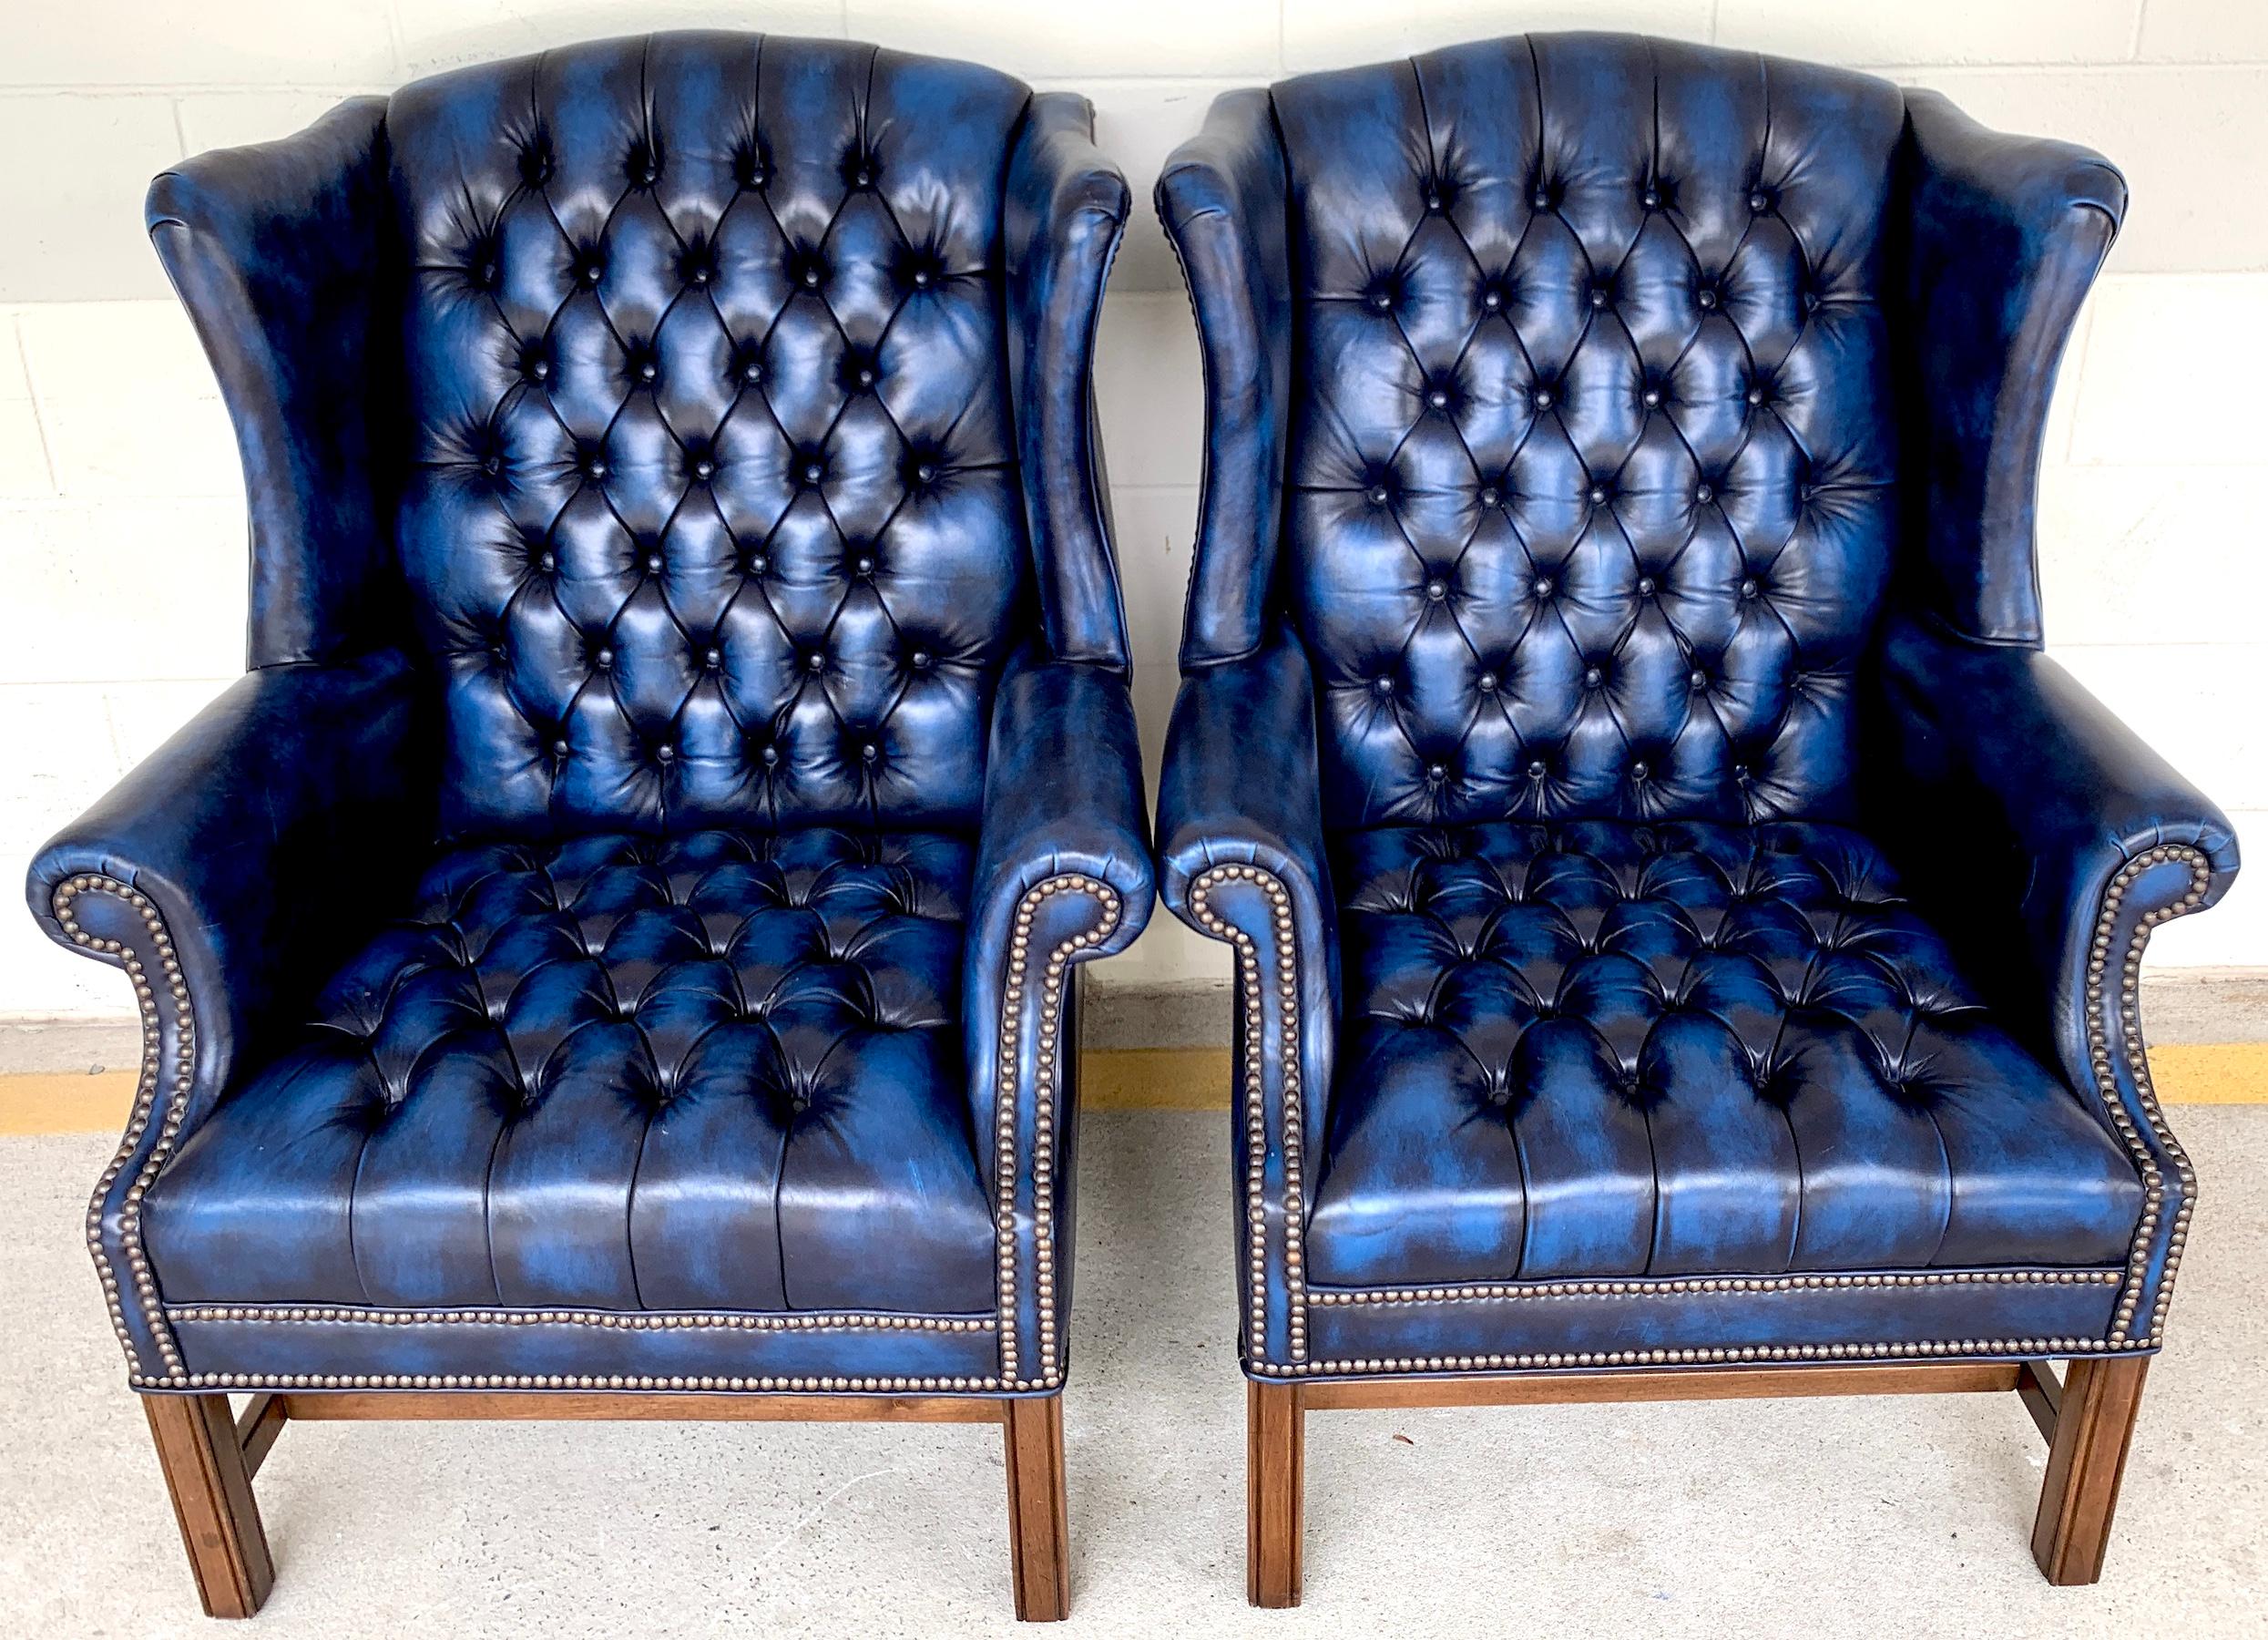 Pair of English Hollywood Regency blue leather Wing Back Chesterfield Chairs 1